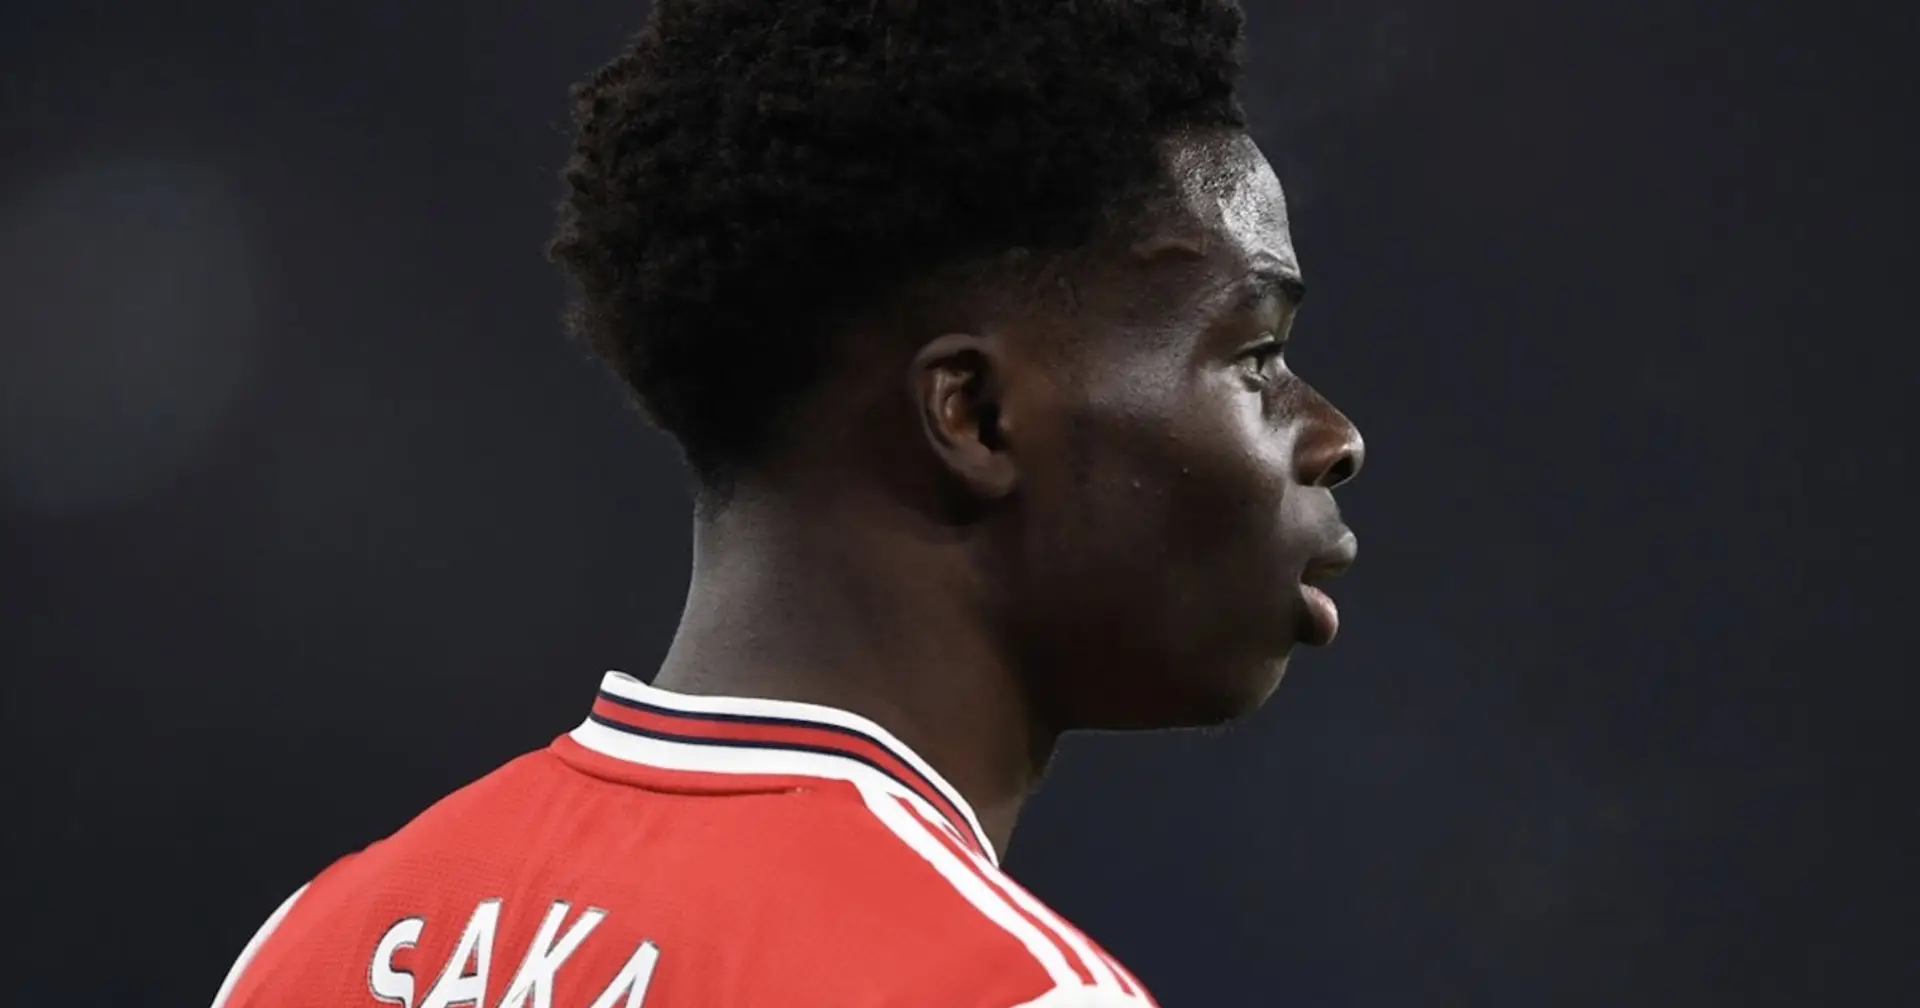 Does Bukayo Saka's situation mean that 'play the kids' is not a risk-averse strategy anymore?